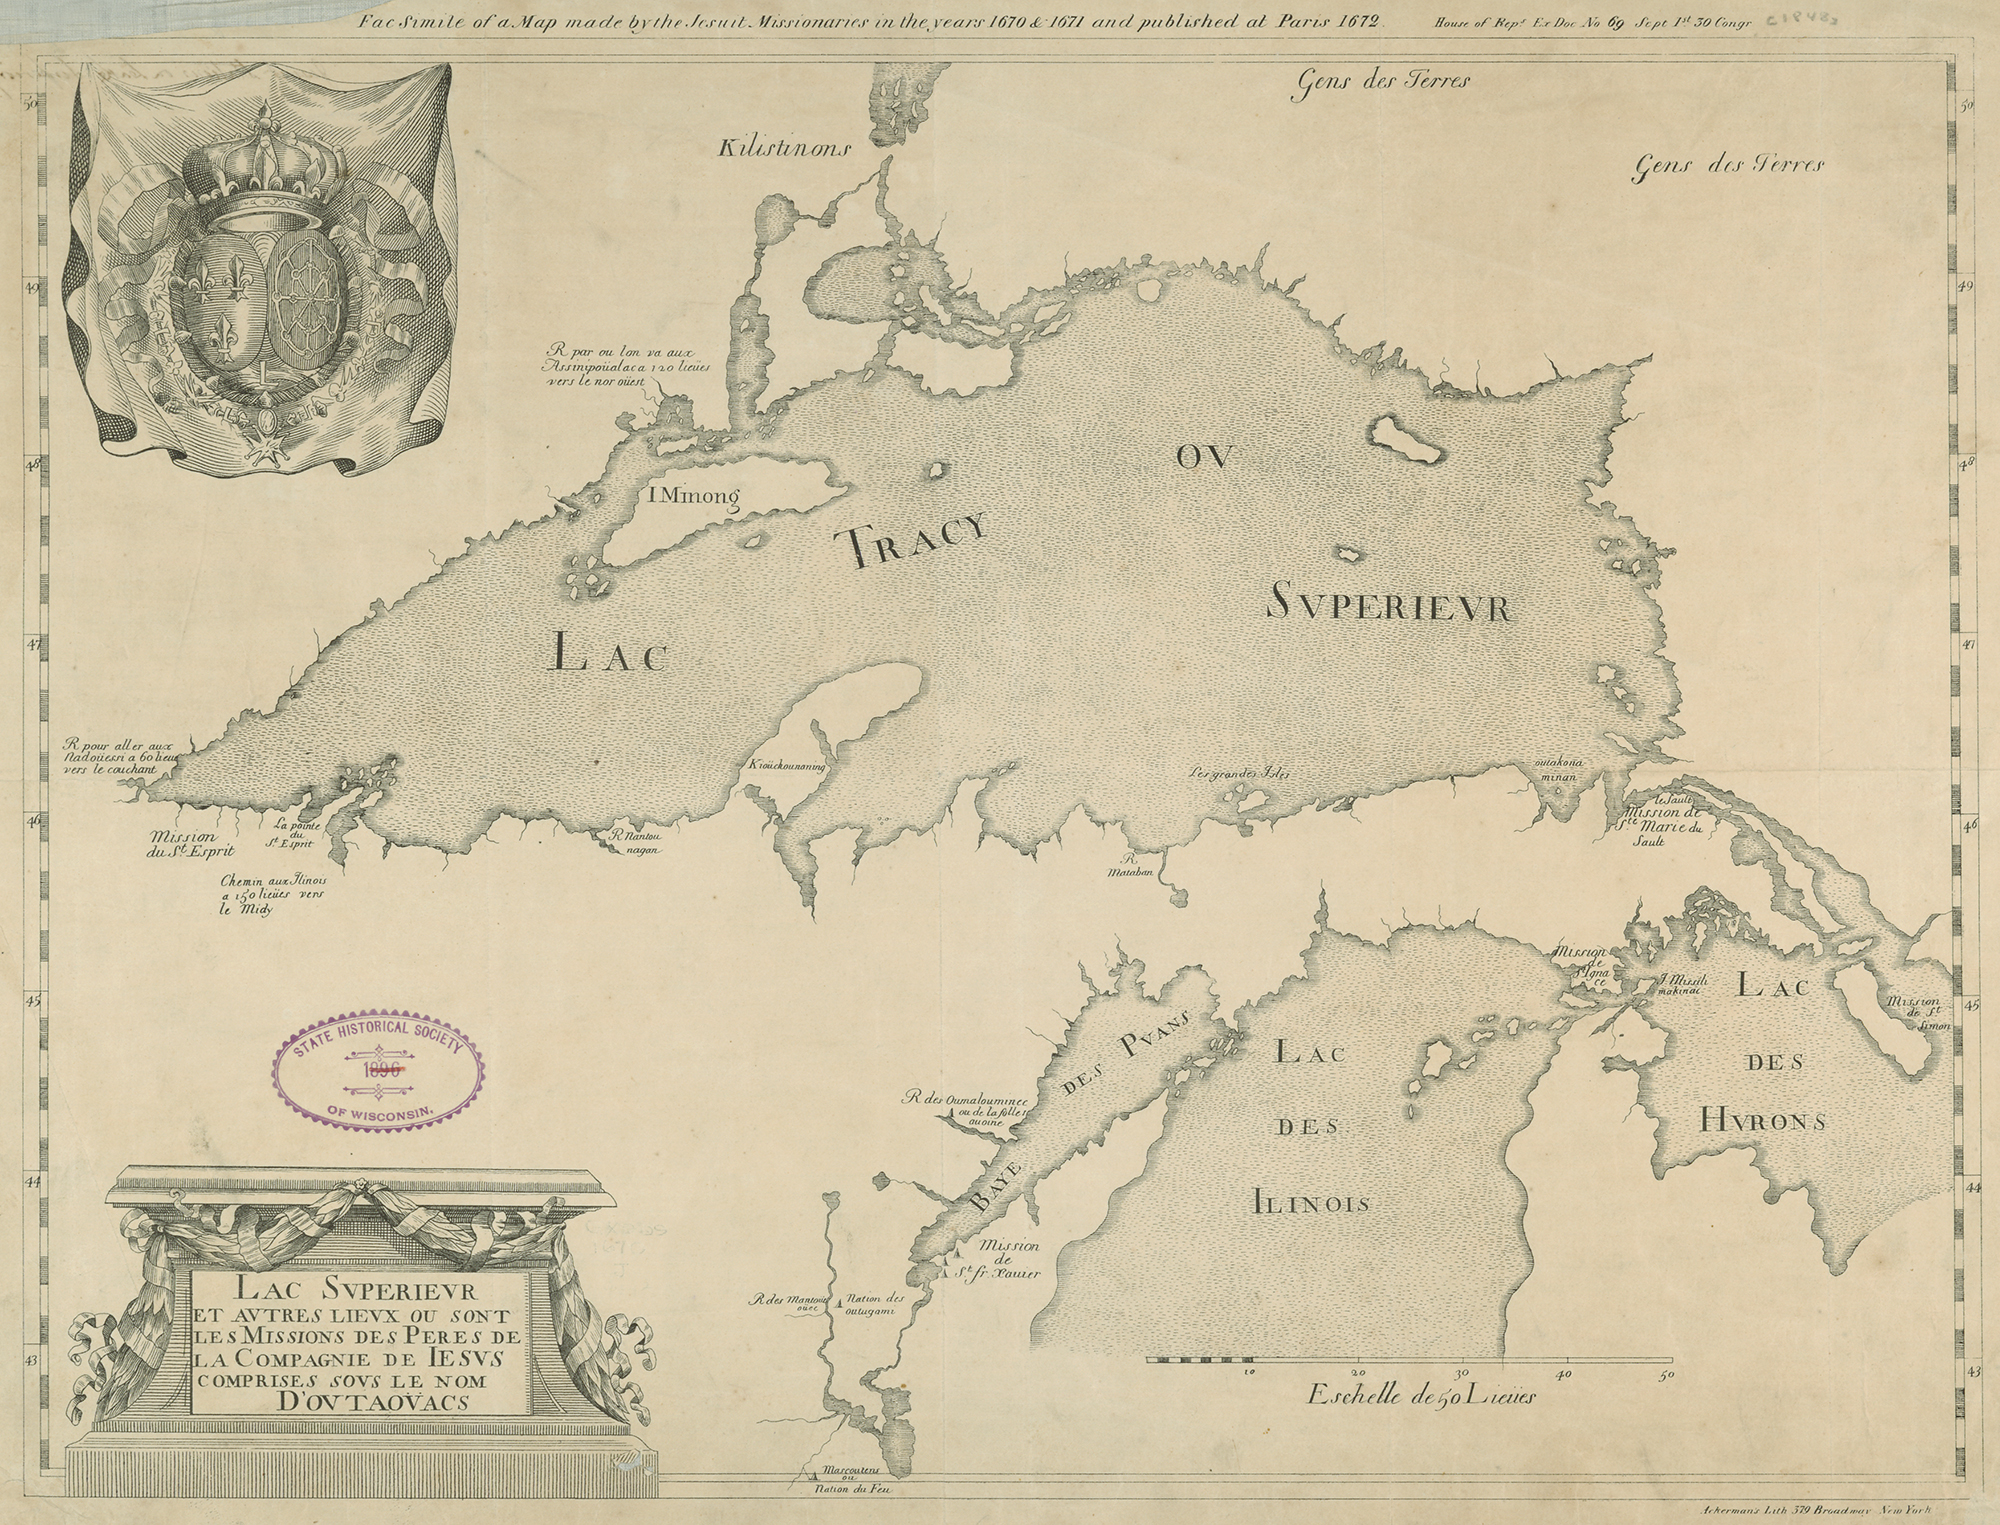 A detailed early French map of Lake Superior